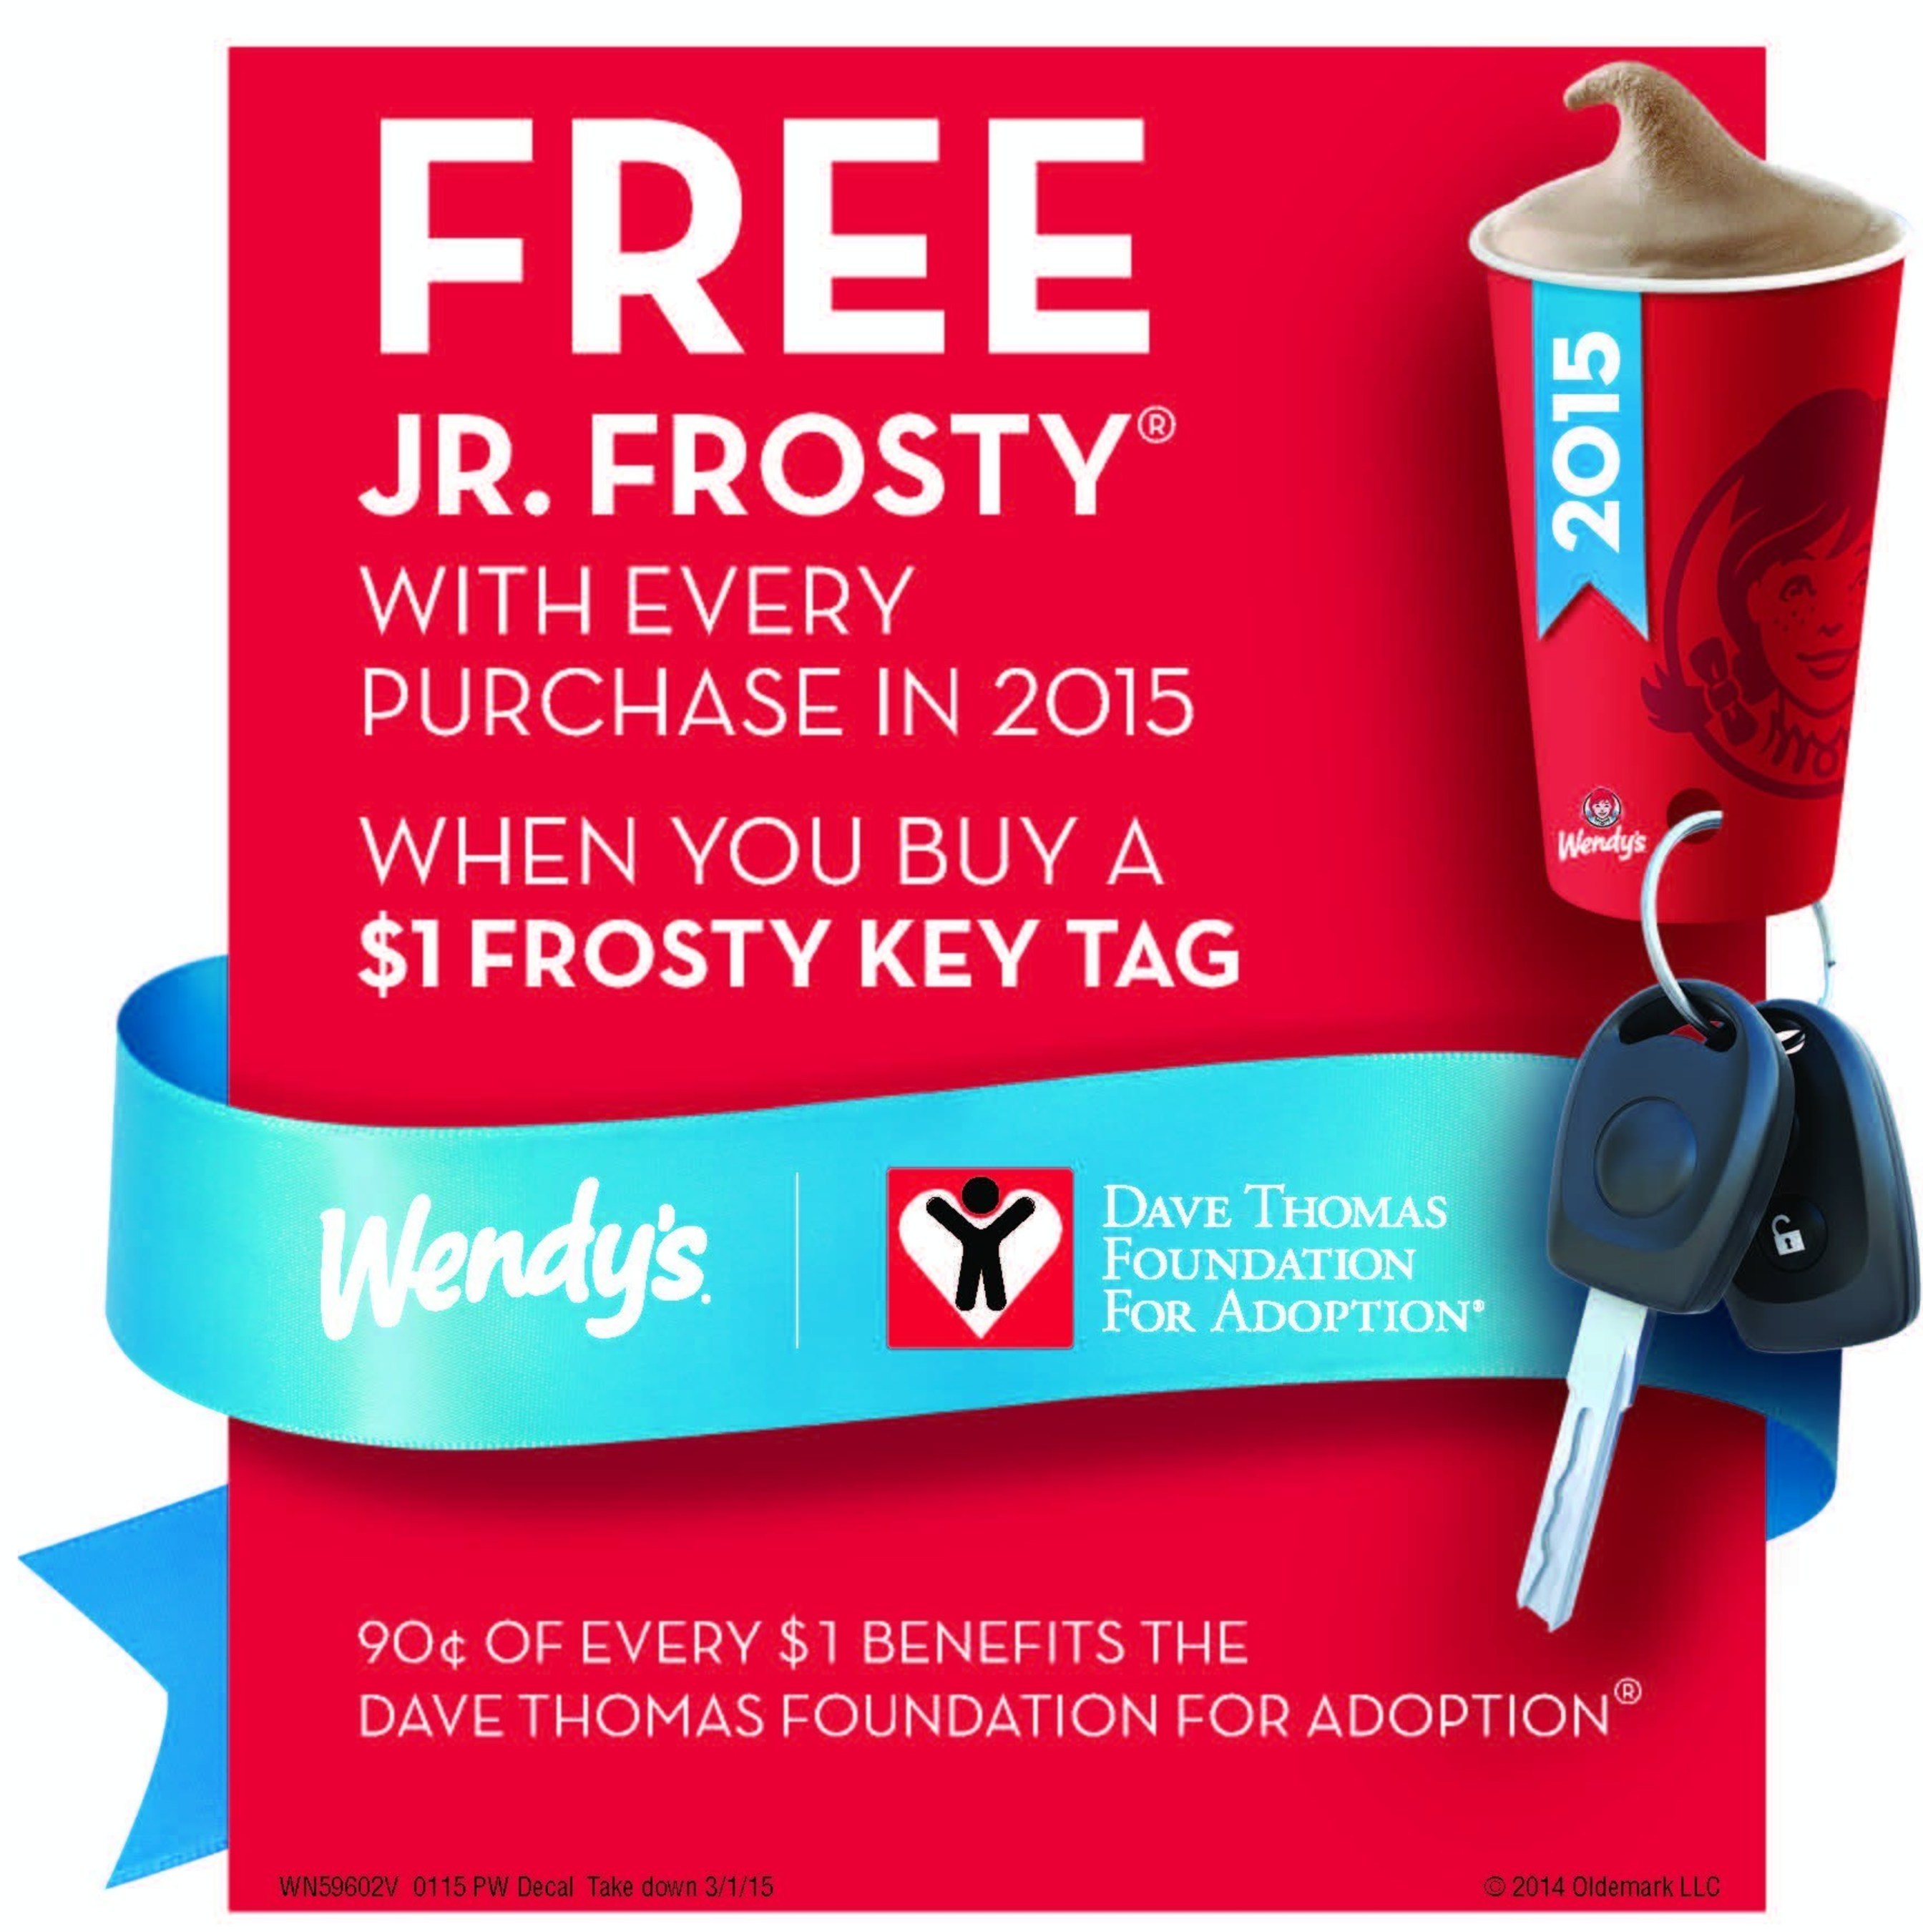 For $1, Wendy's customers can buy a Frosty Key Tag that gets them a free Jr. Frosty with every purchase during 2015, while supplies last.